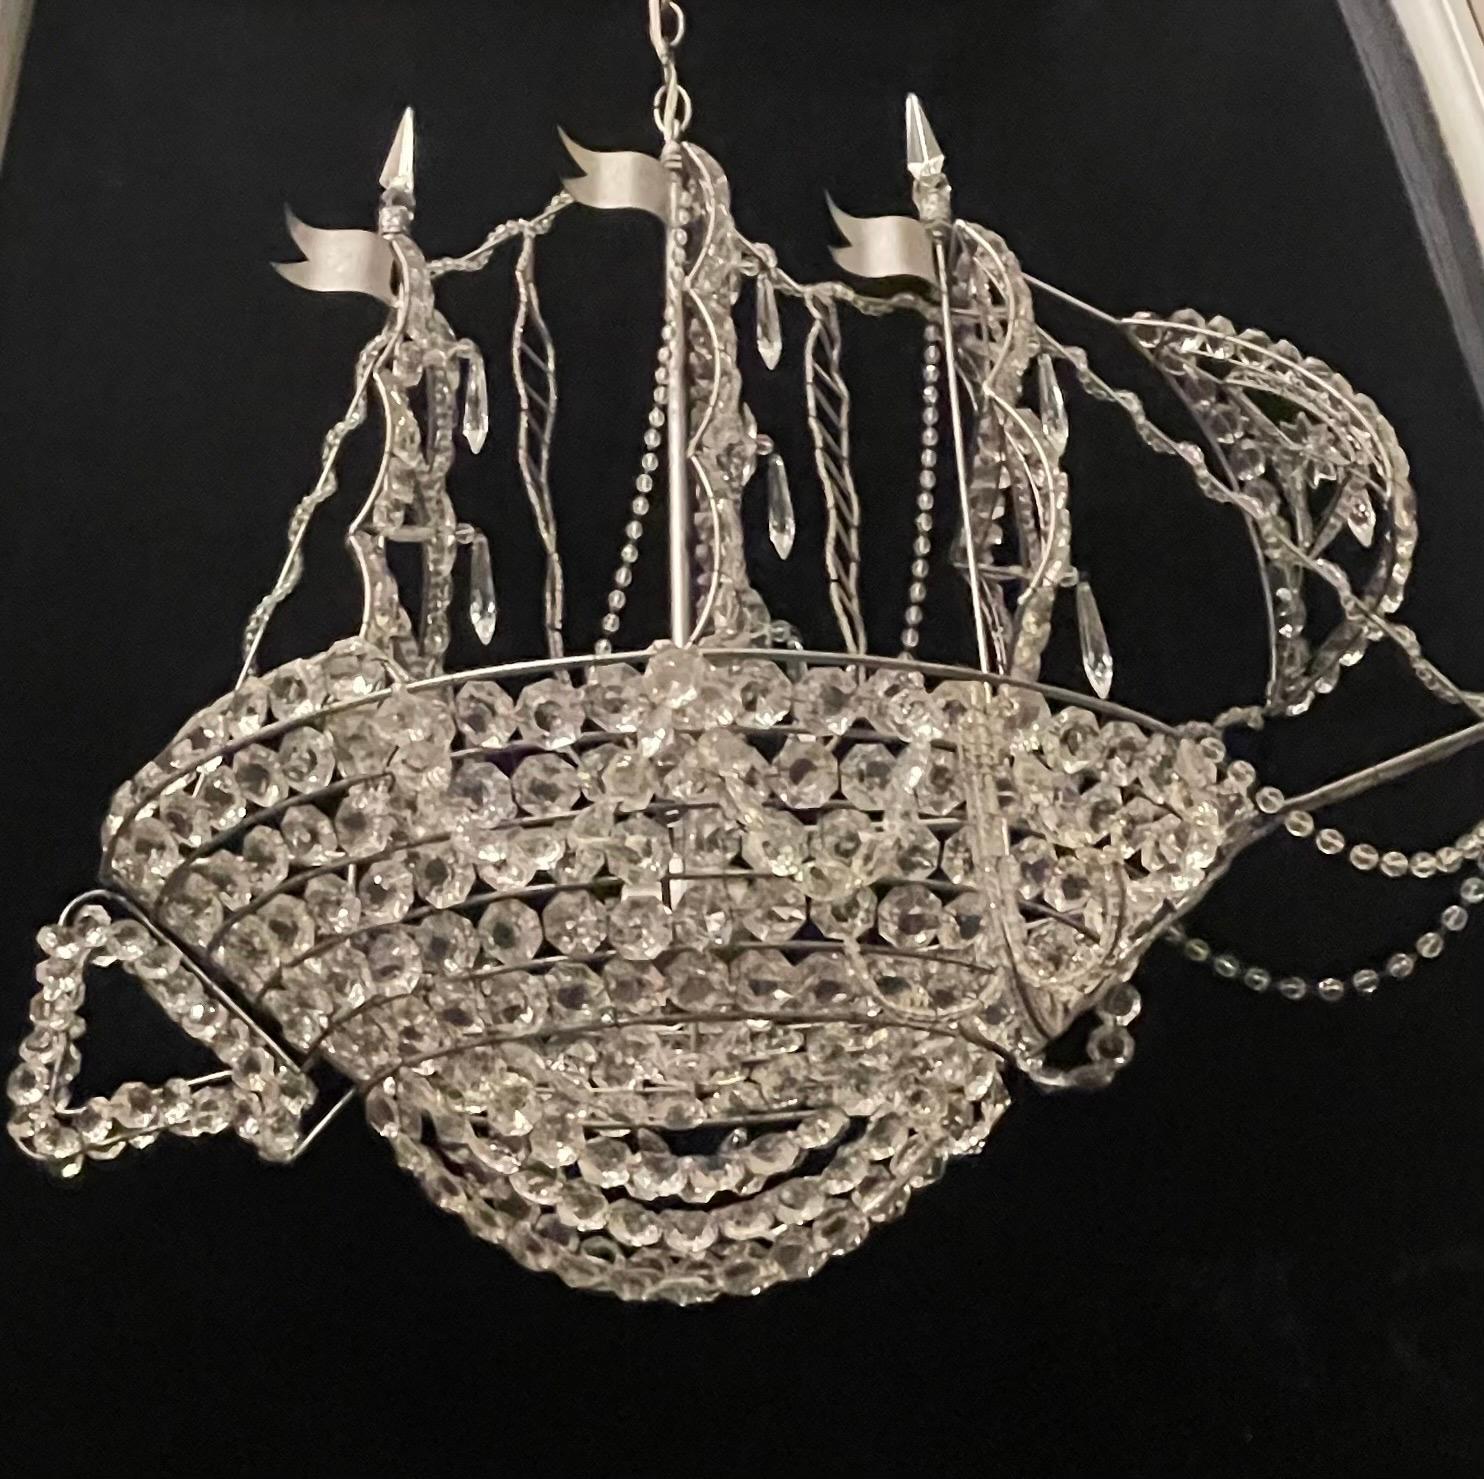 Beautiful Vintage Large Italian Crystal Beaded Gilt Boat Chandelier Ship Fixture In Good Condition For Sale In Roslyn, NY